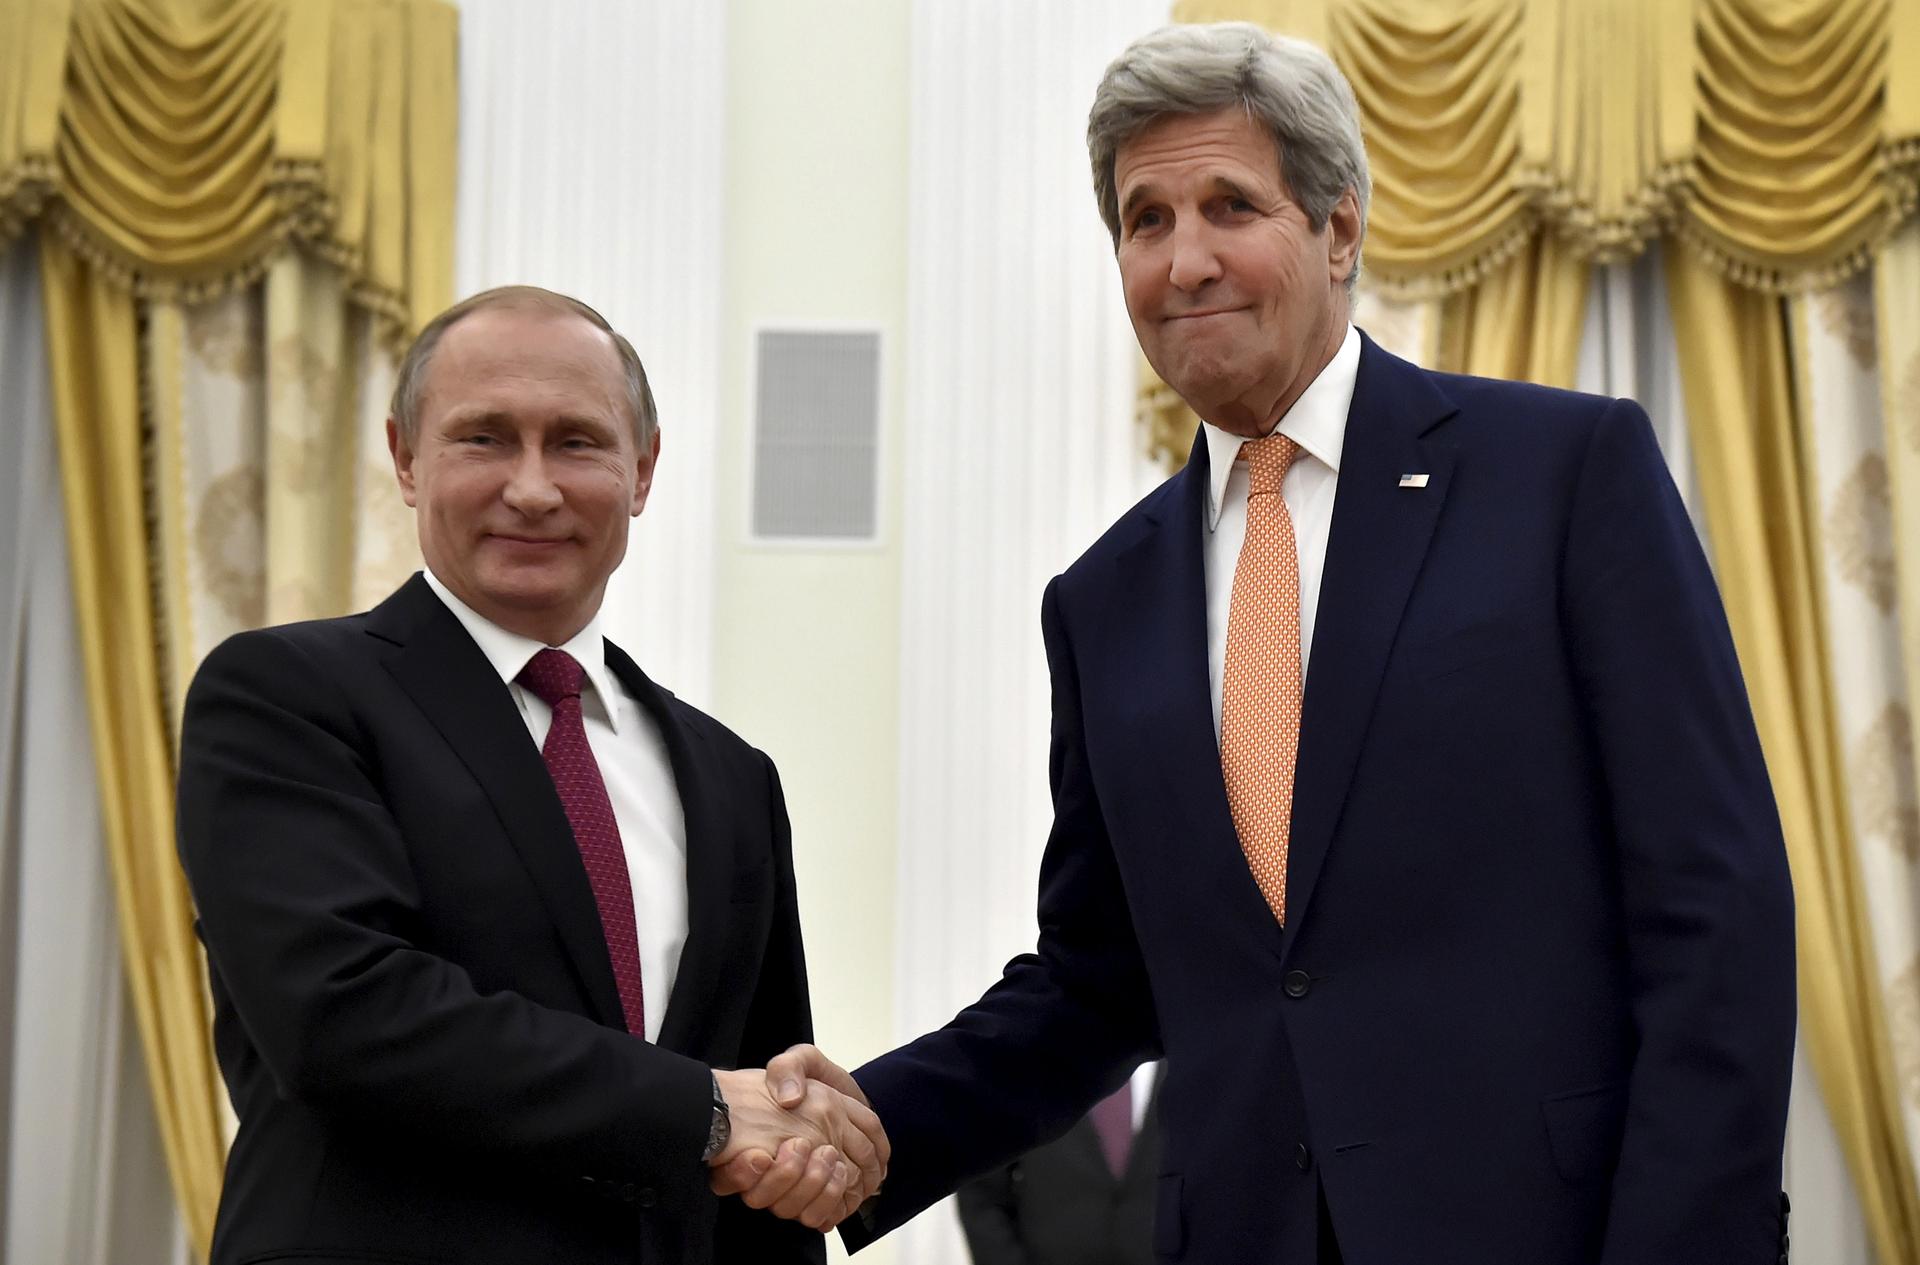 Russian President Vladimir Putin shakes hands with U.S. Secretary of State John Kerry at the Kremlin in Moscow, Russia.